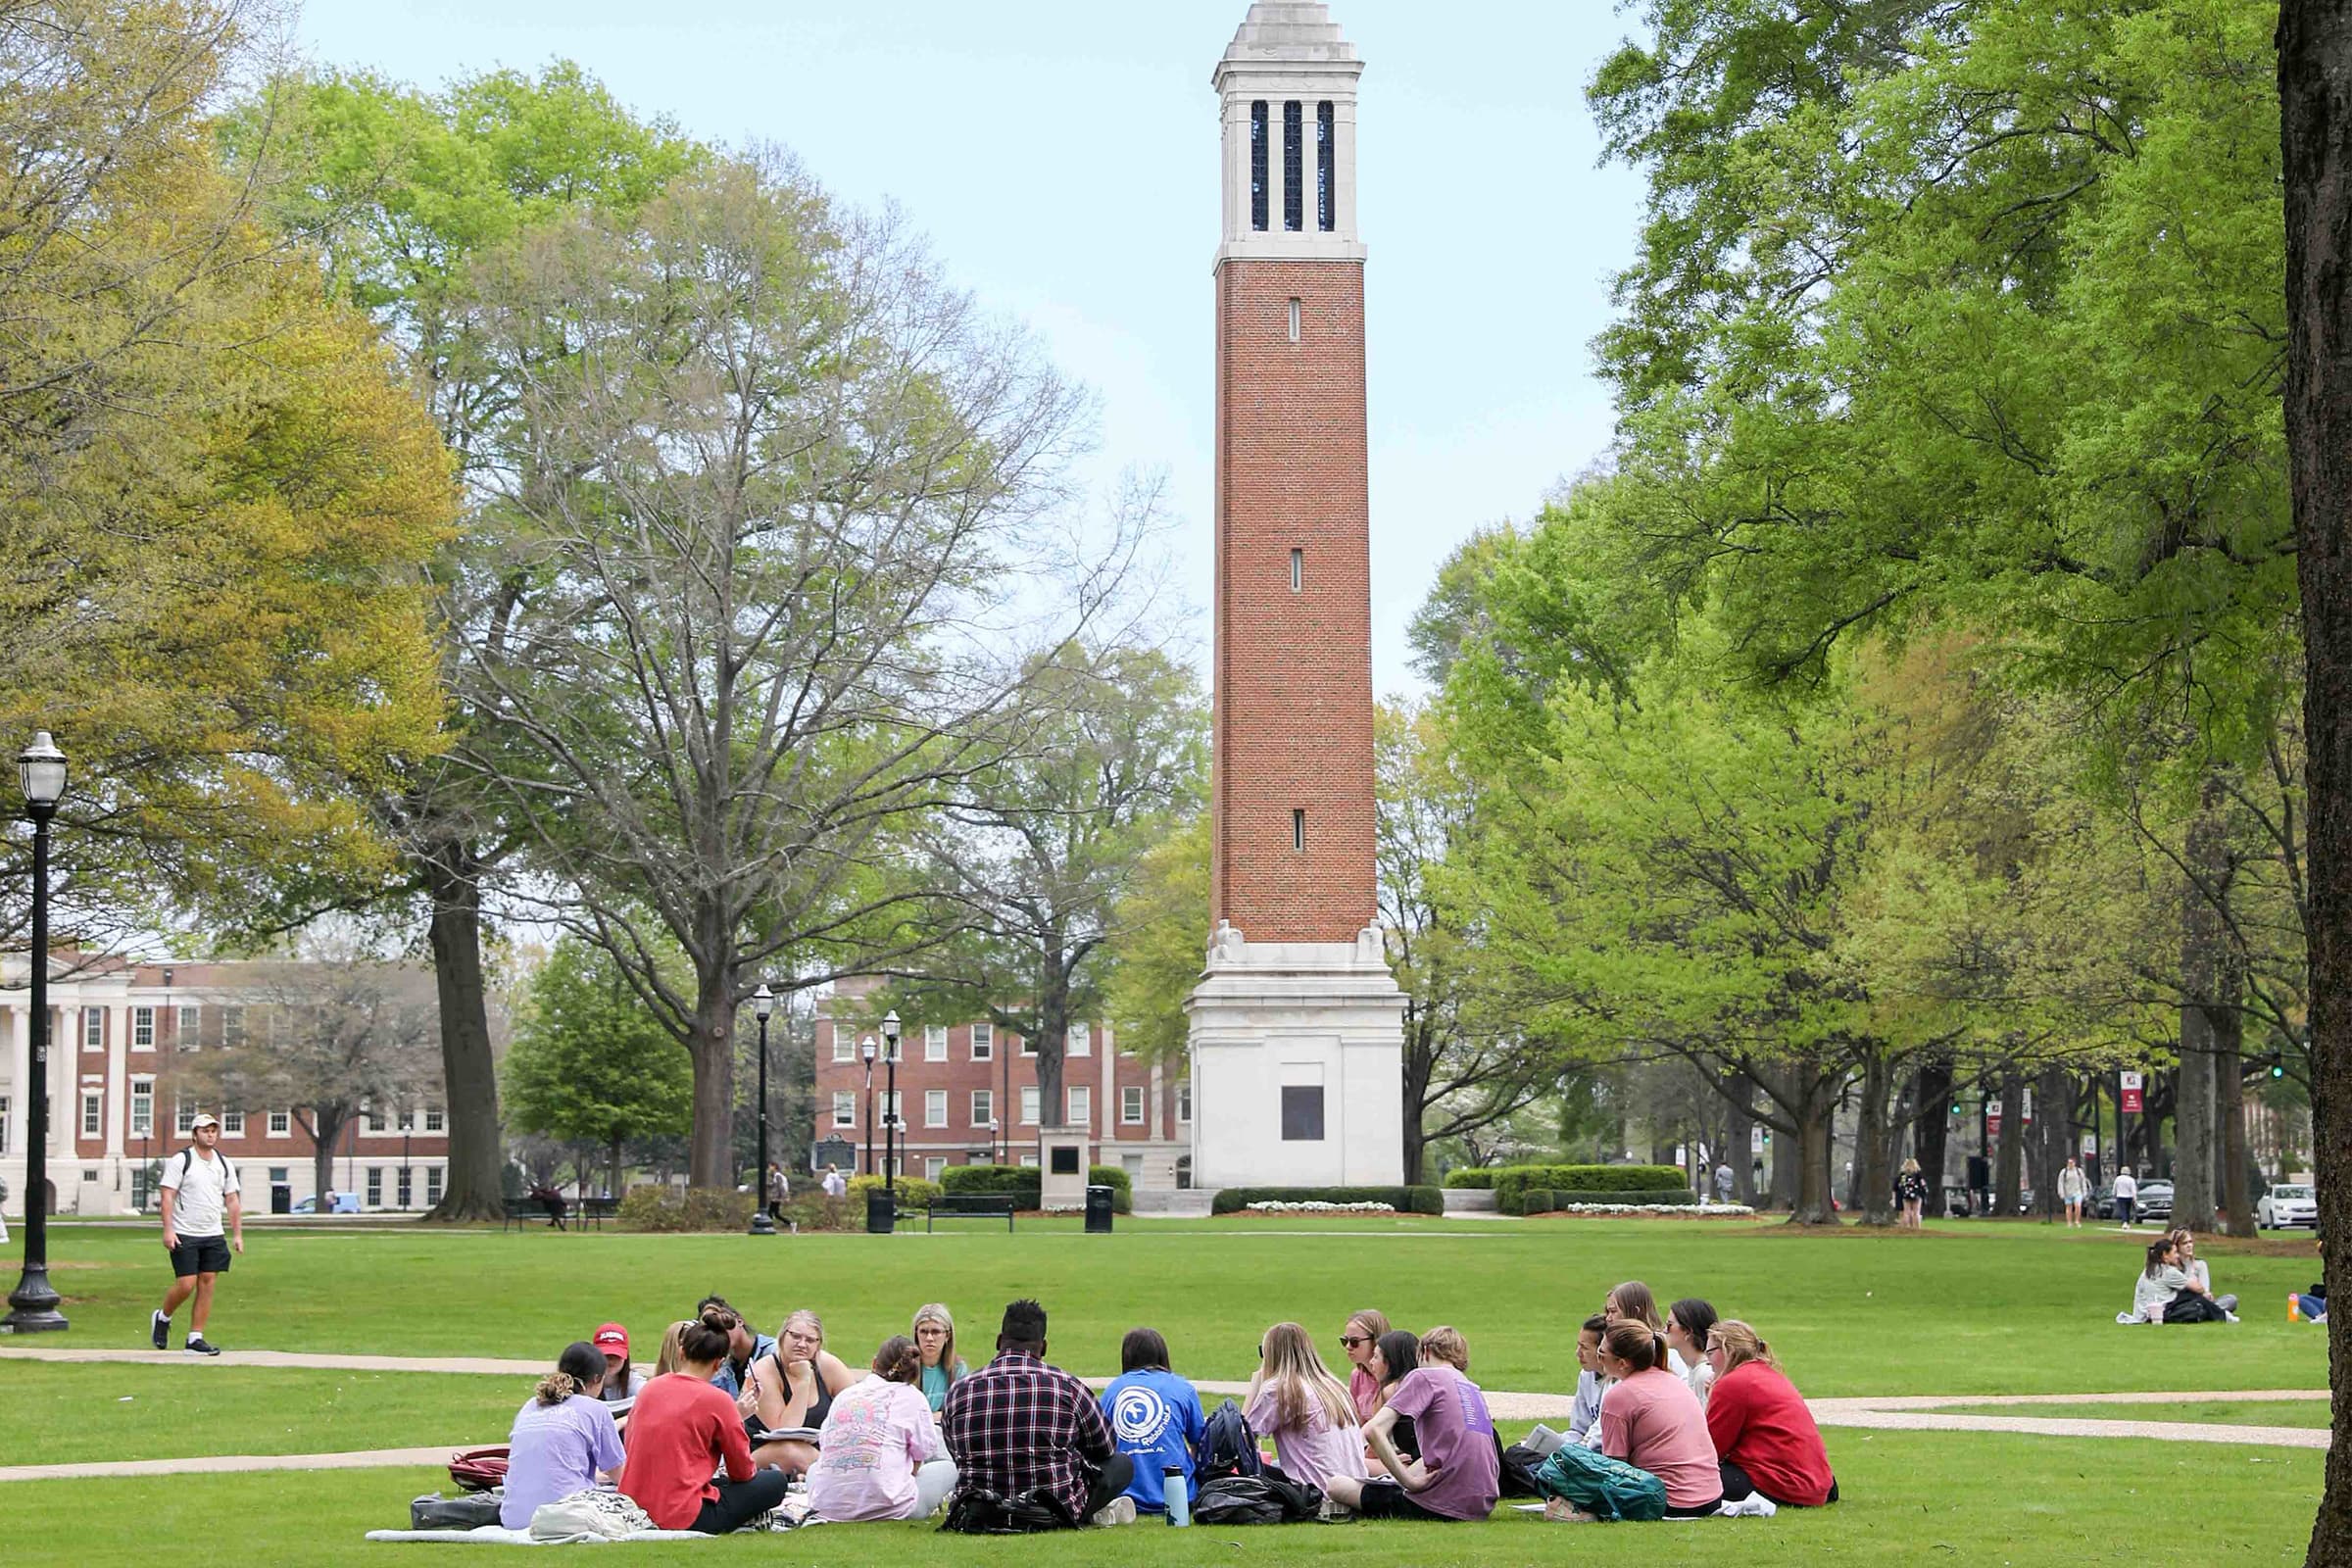 Students sitting in a circle in front of Denny Chimes